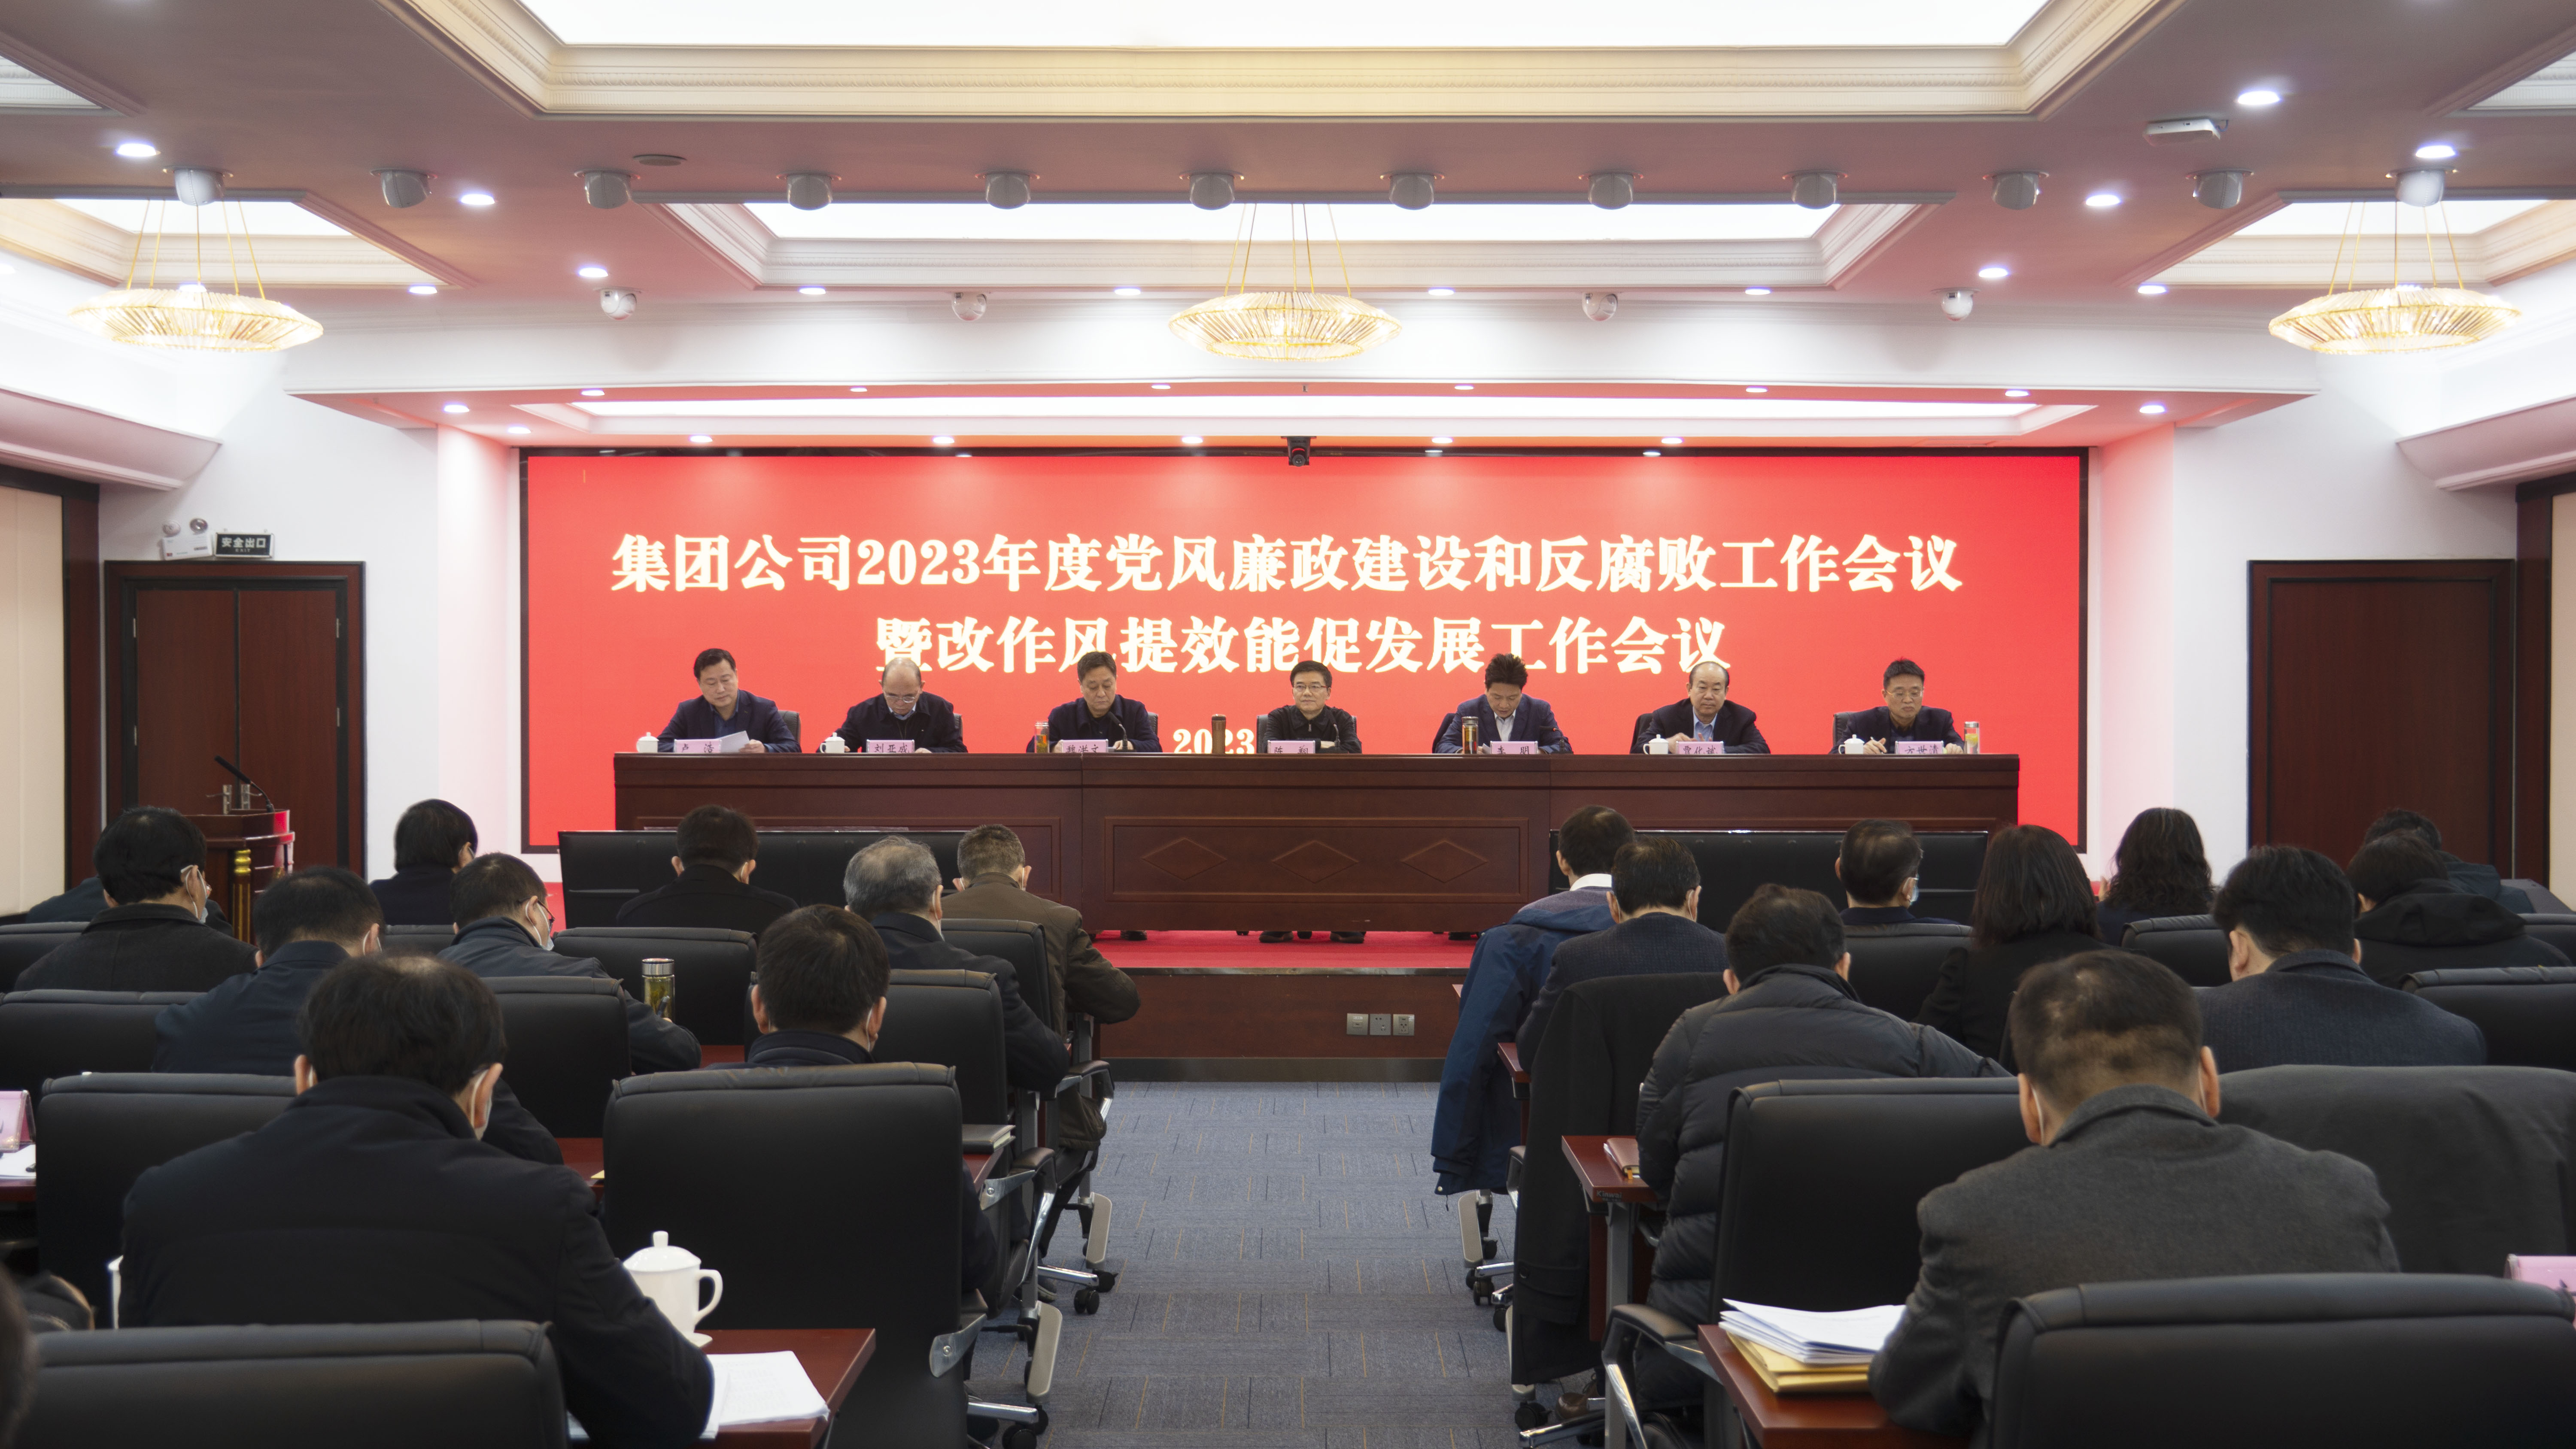 The Group's company held the 2023 party style and clean government construction and anti -corruption work conference and modified work style to promote development work conference